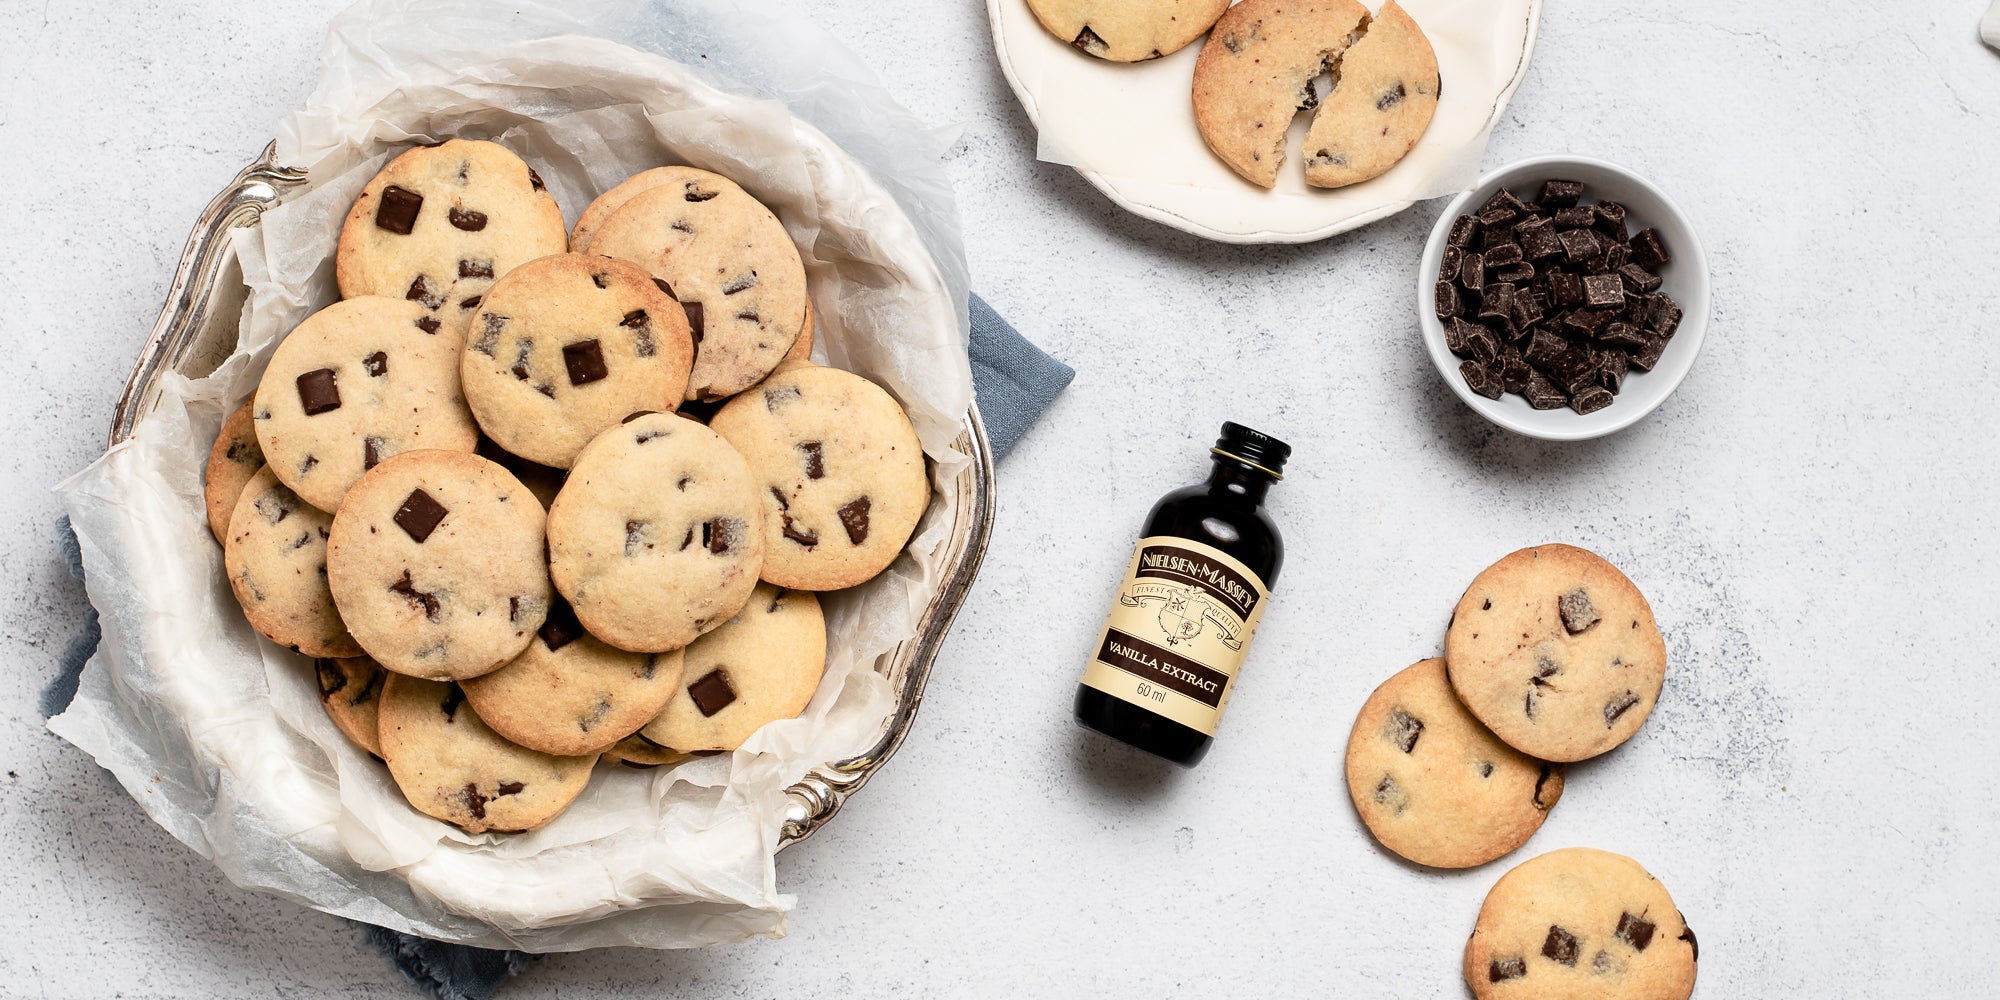 Top view of Chocolate Chunk Shortbread in a cookie tin, next to a bottle of Nielsen-Massey vanilla extract and some shortbread biscuits